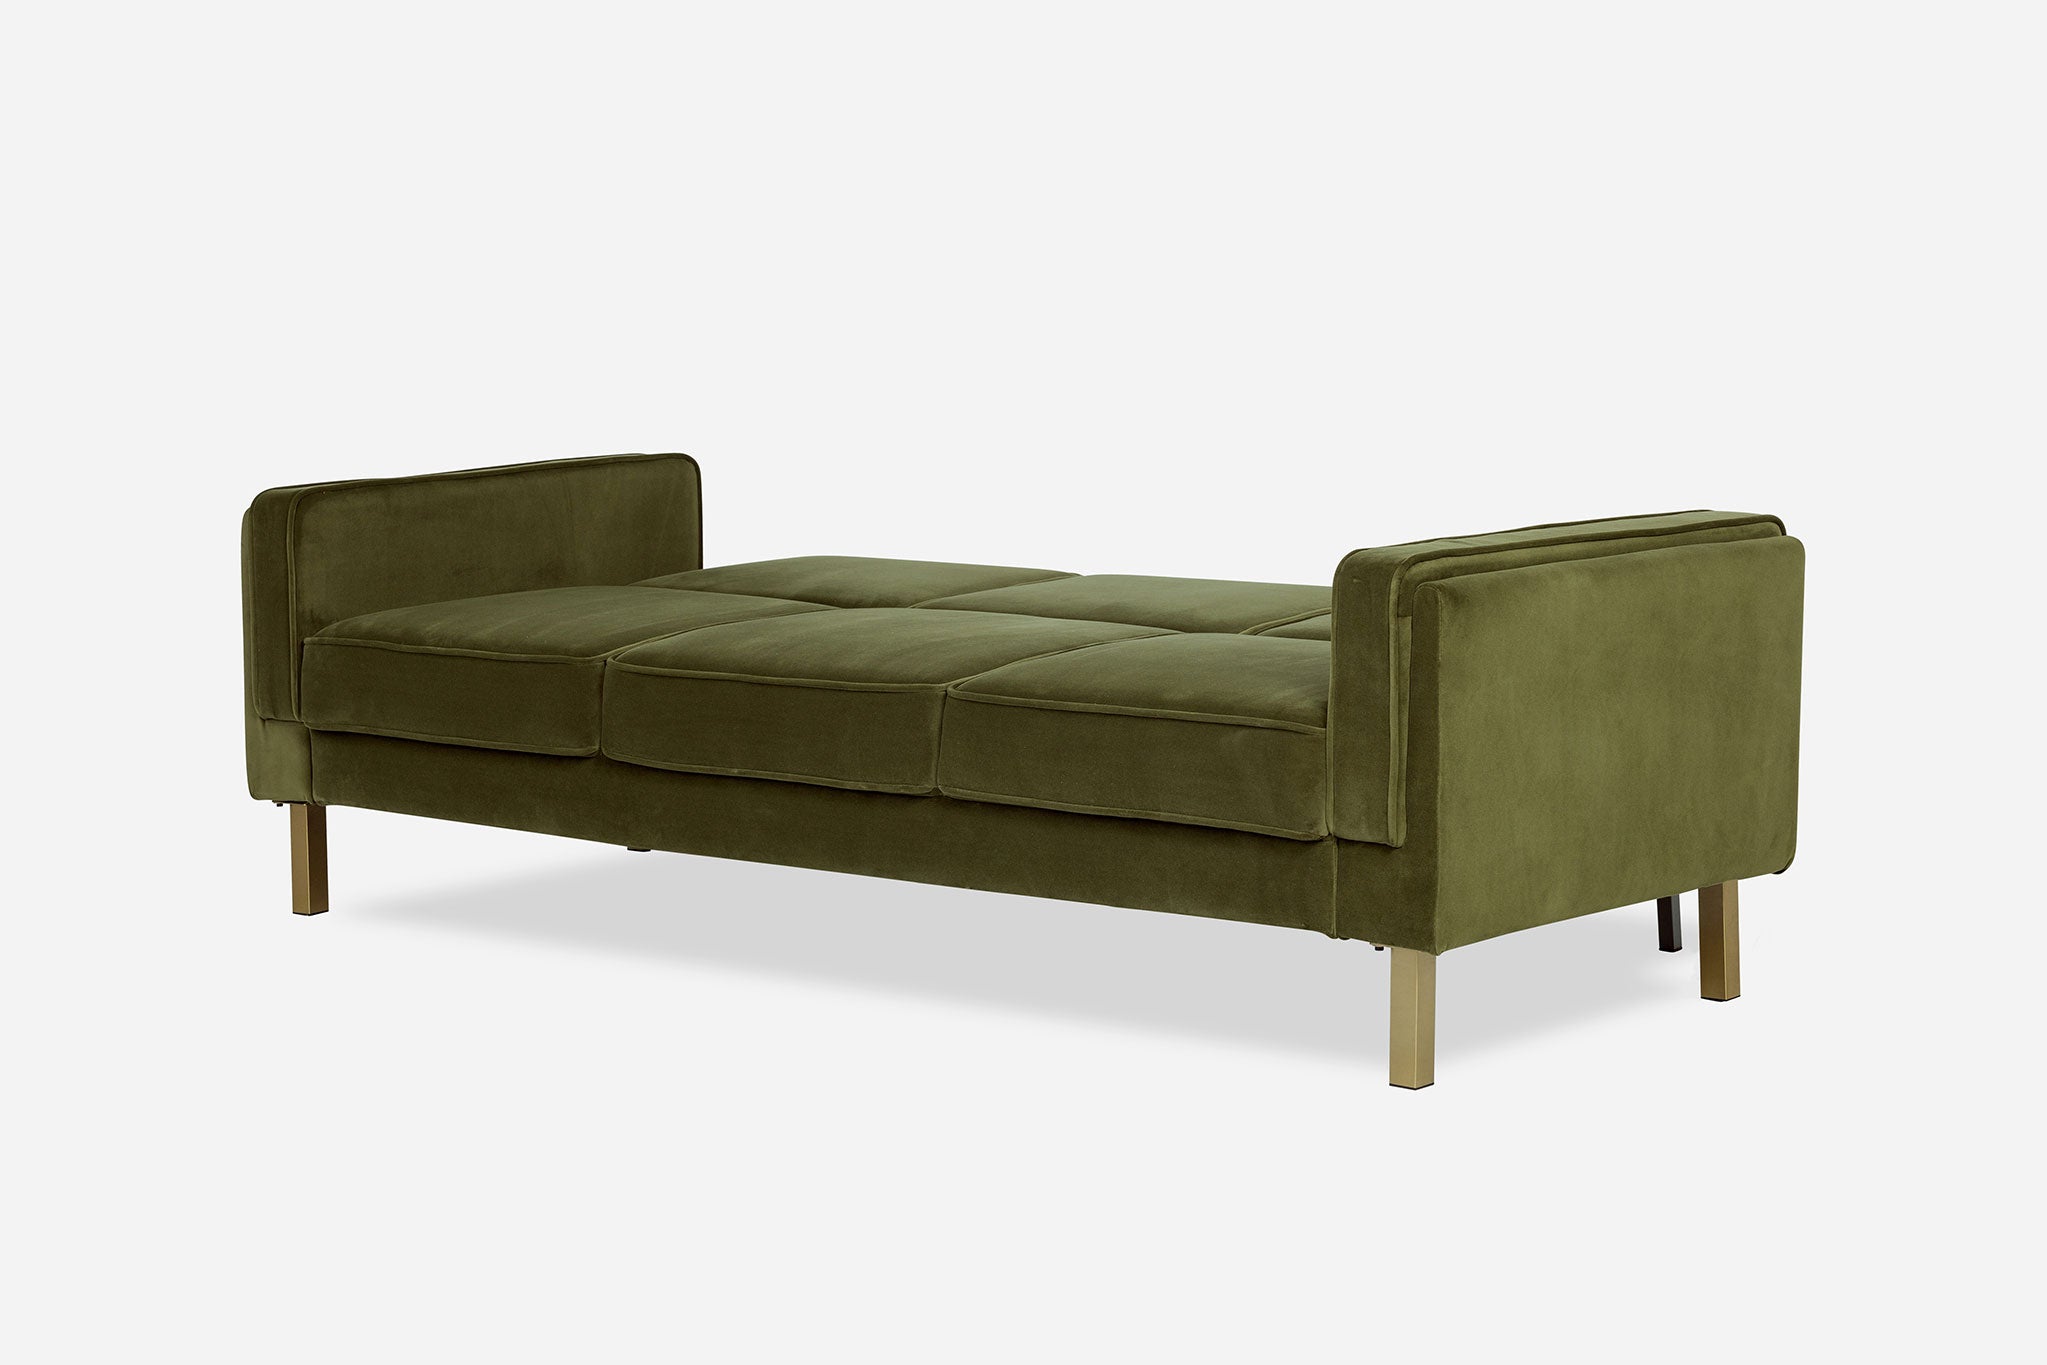 side view of the albany sleeper sofa as a bed in olive velvet with gold legs